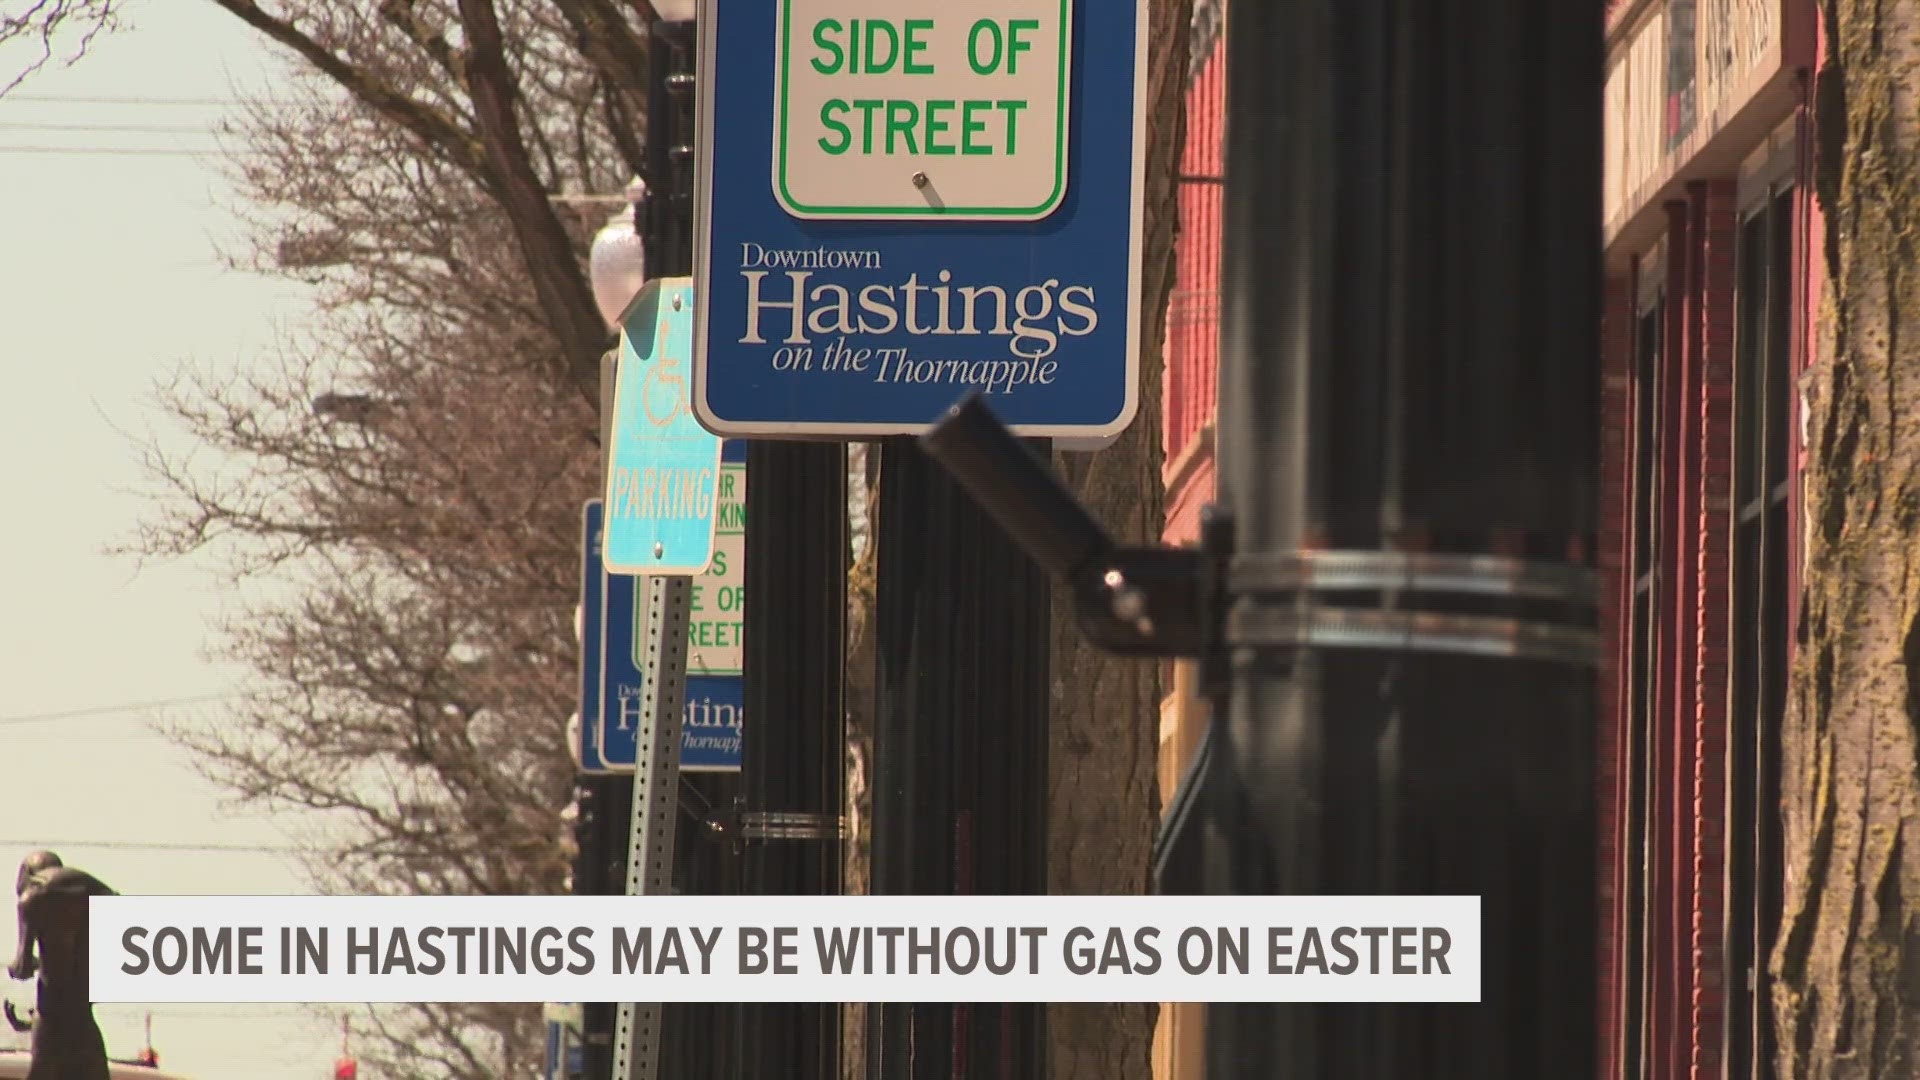 Homeowners and businesses in Hastings and Nashville may be spending Easter Sunday with no heat and no way to cook after a major gas leak.